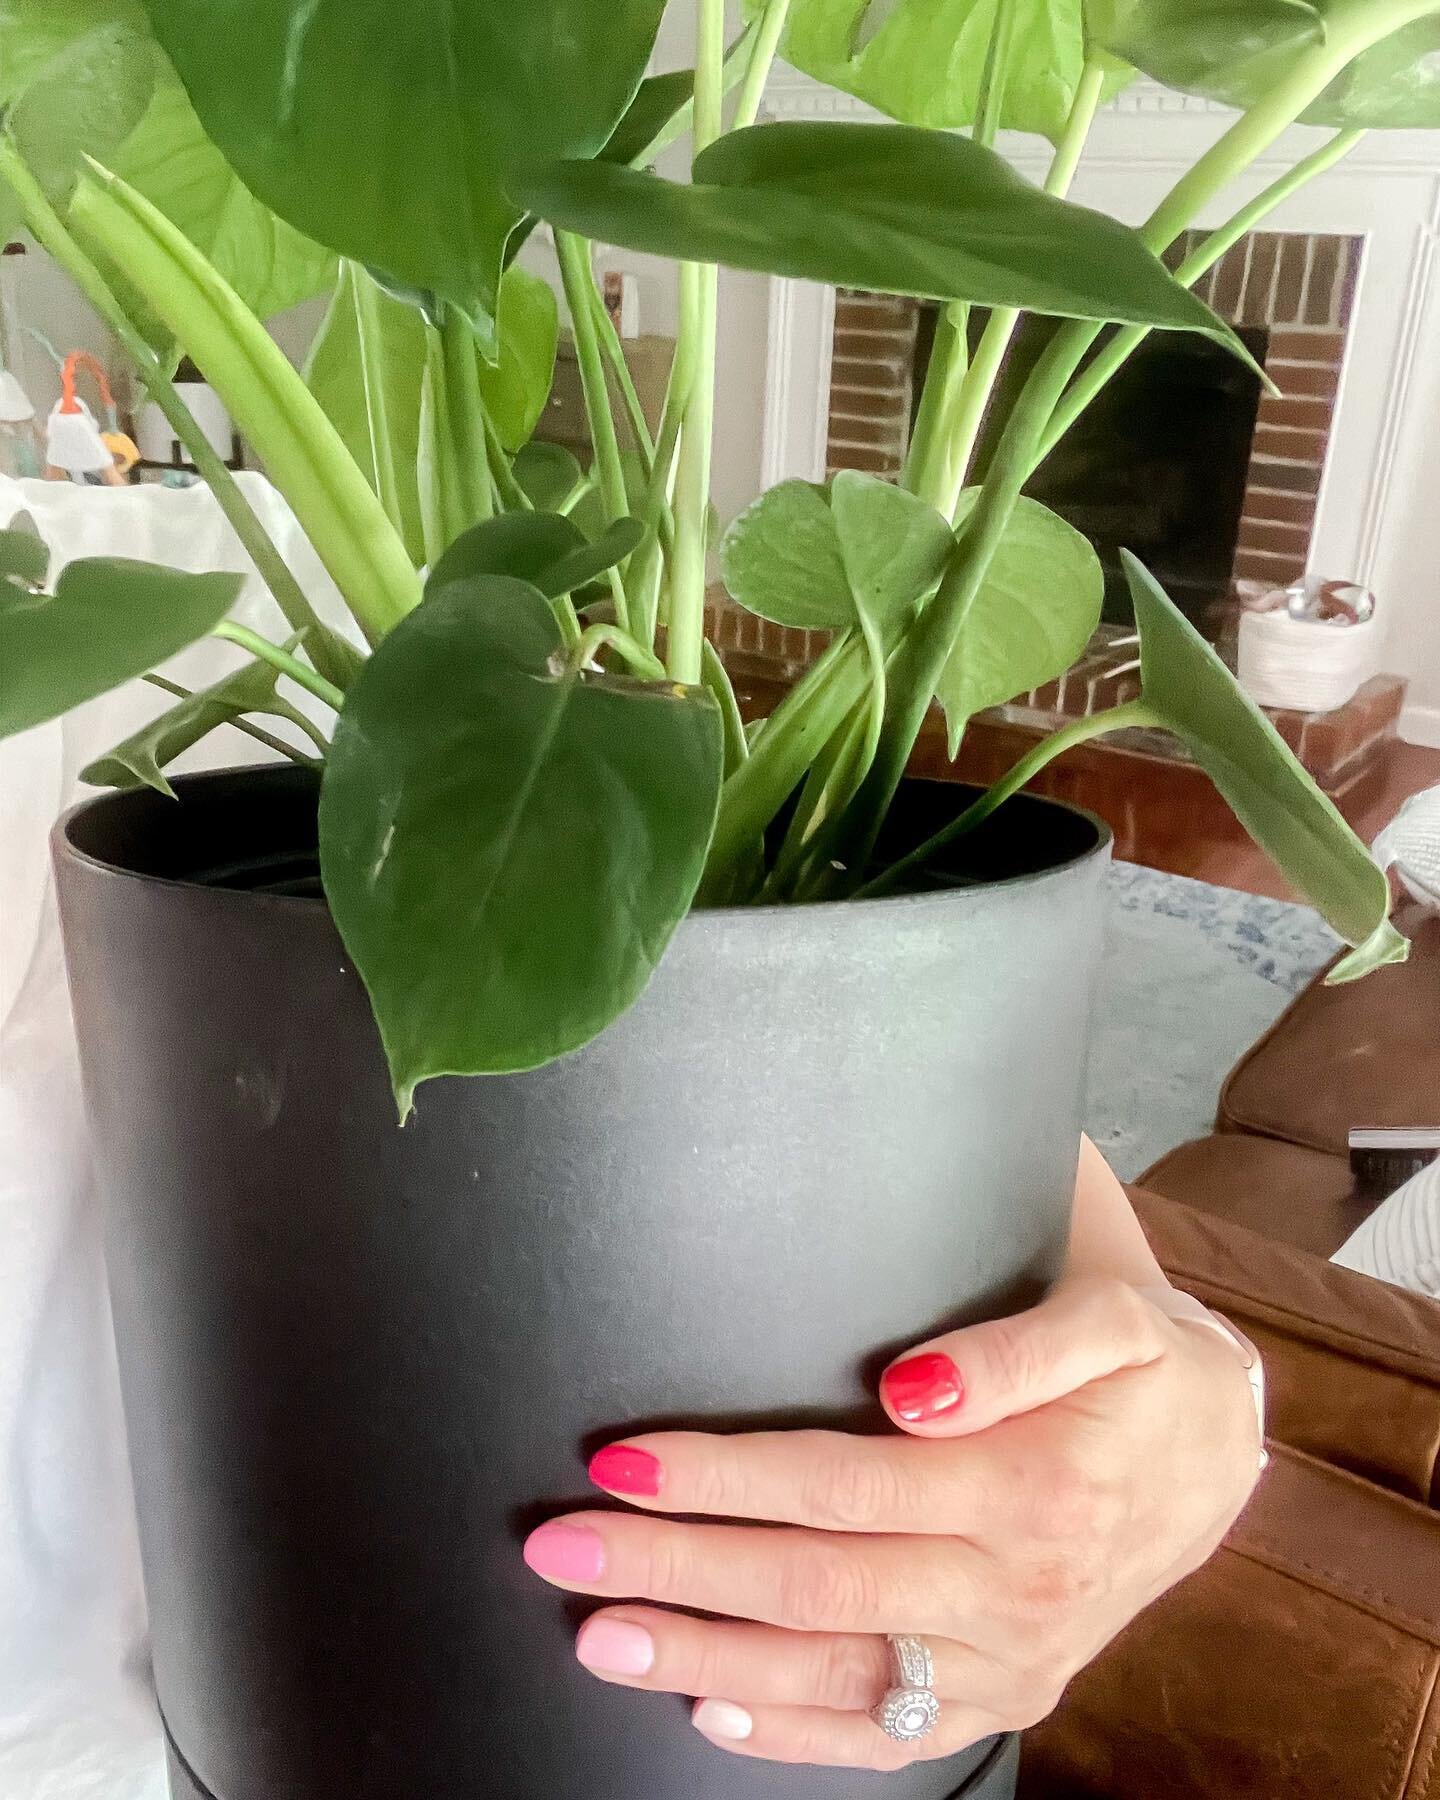 On Wednesdays We Wear Pink Polish... And we sneak in plants from the trunk🤣🤣🤣 I couldn&rsquo;t help it @hiltoncarter @target got me. 
I love this fun ombr&eacute; mani using polish from @oliveandjune. I have been using their polish for a year and 